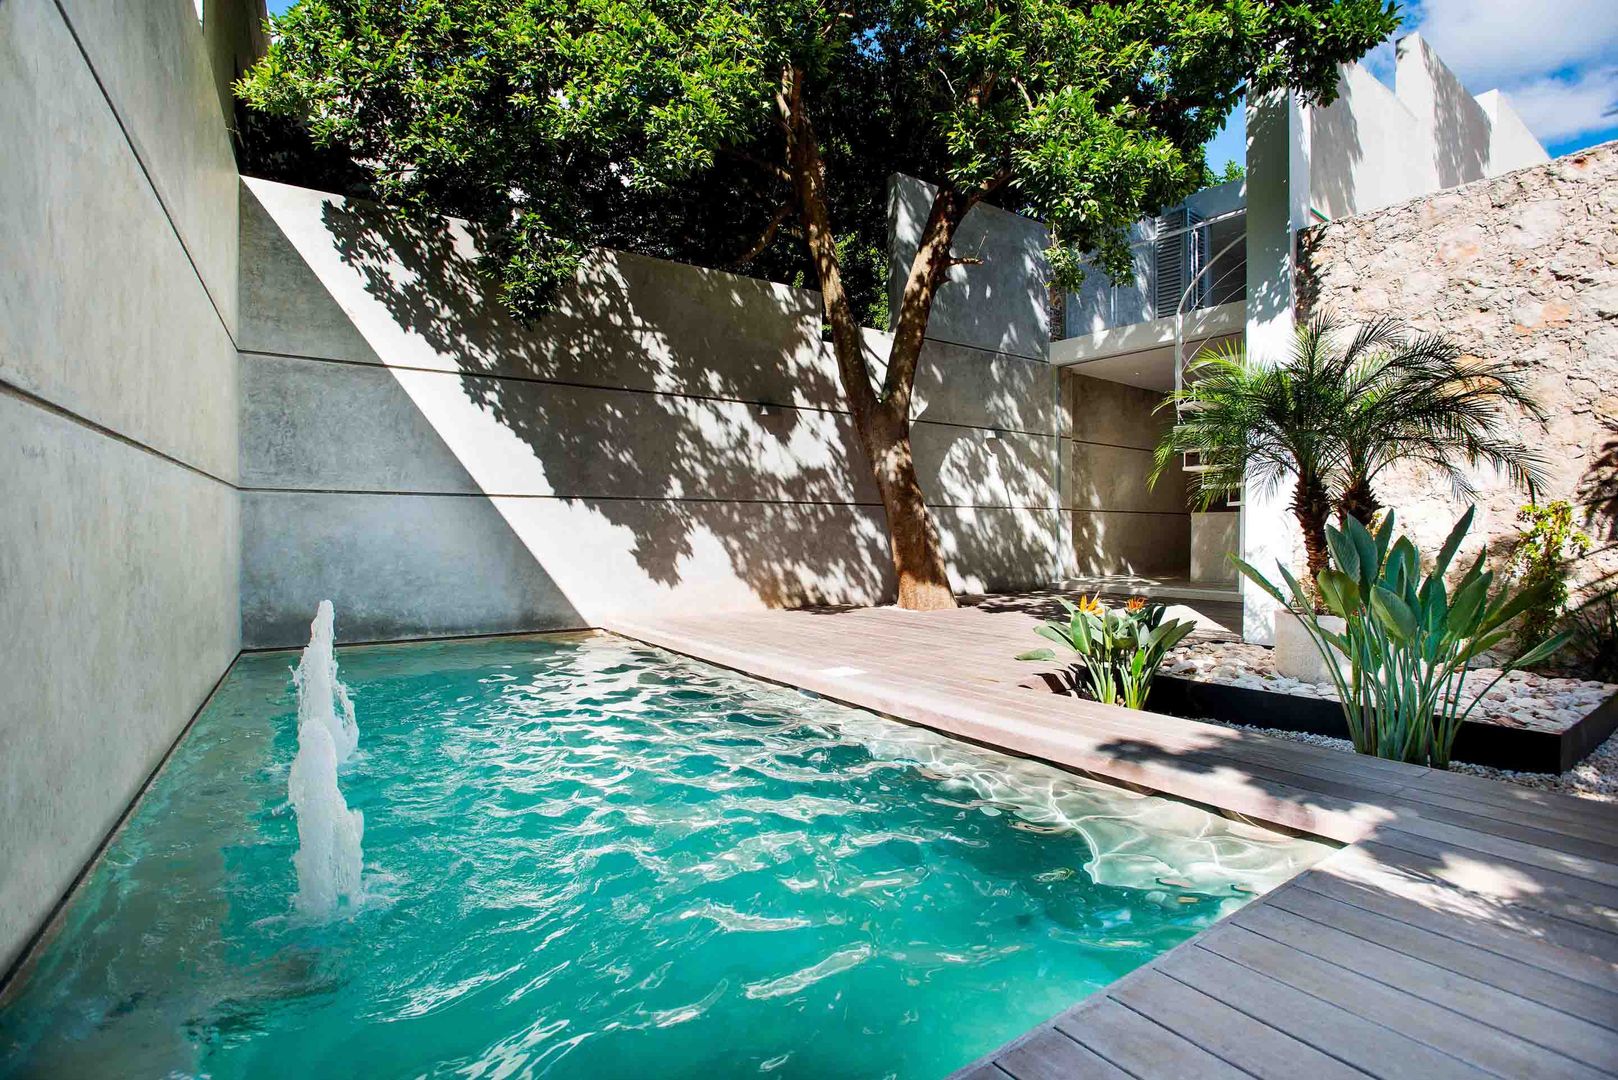 B + H 45 , HPONCE ARQUITECTOS HPONCE ARQUITECTOS Modern pool